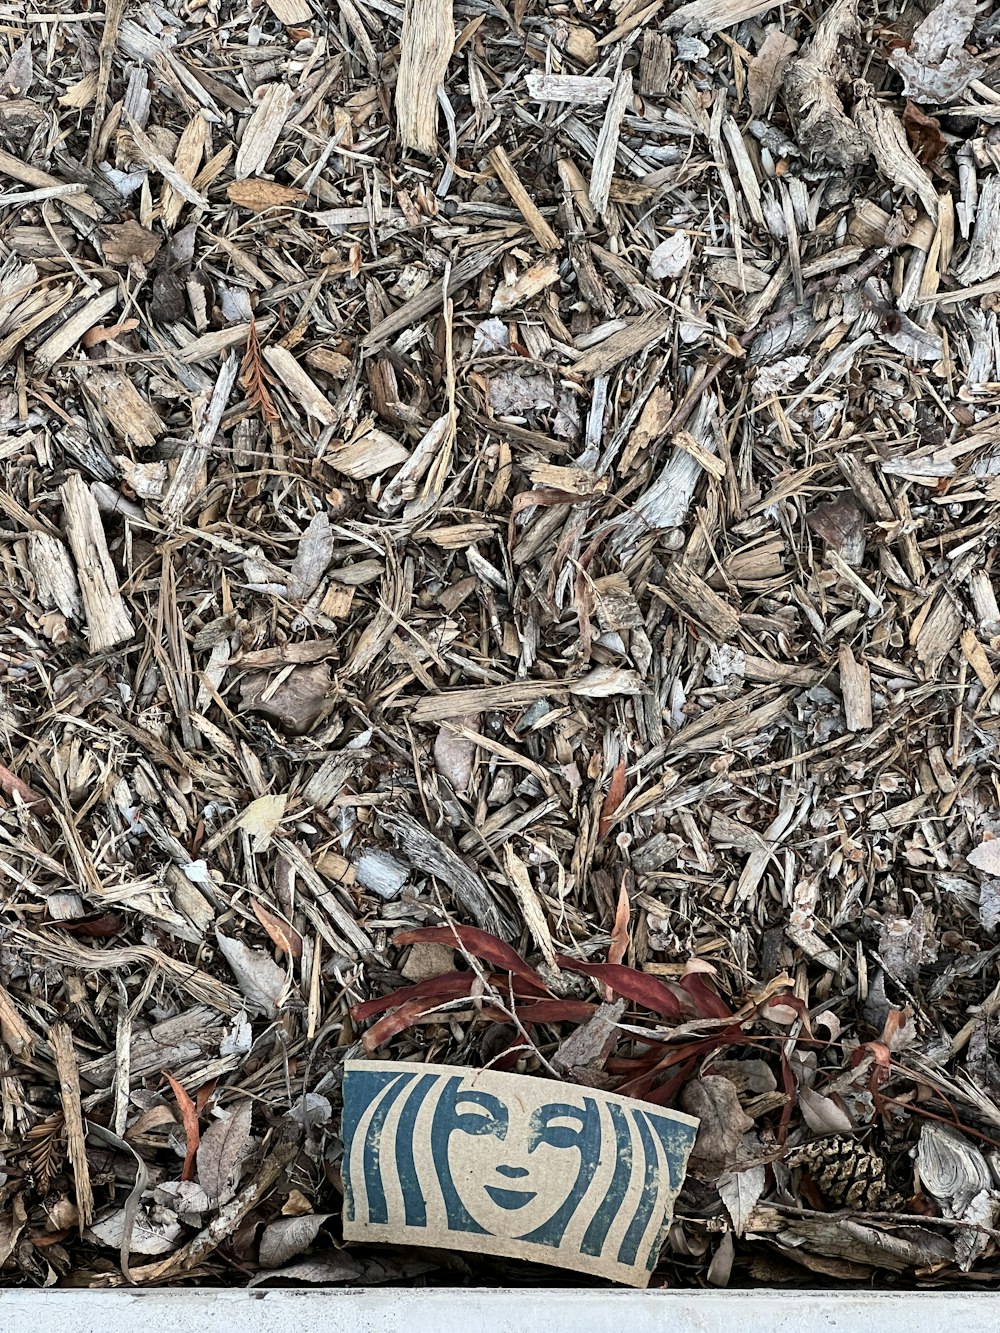 a blue and white vase sitting on top of a pile of wood chips